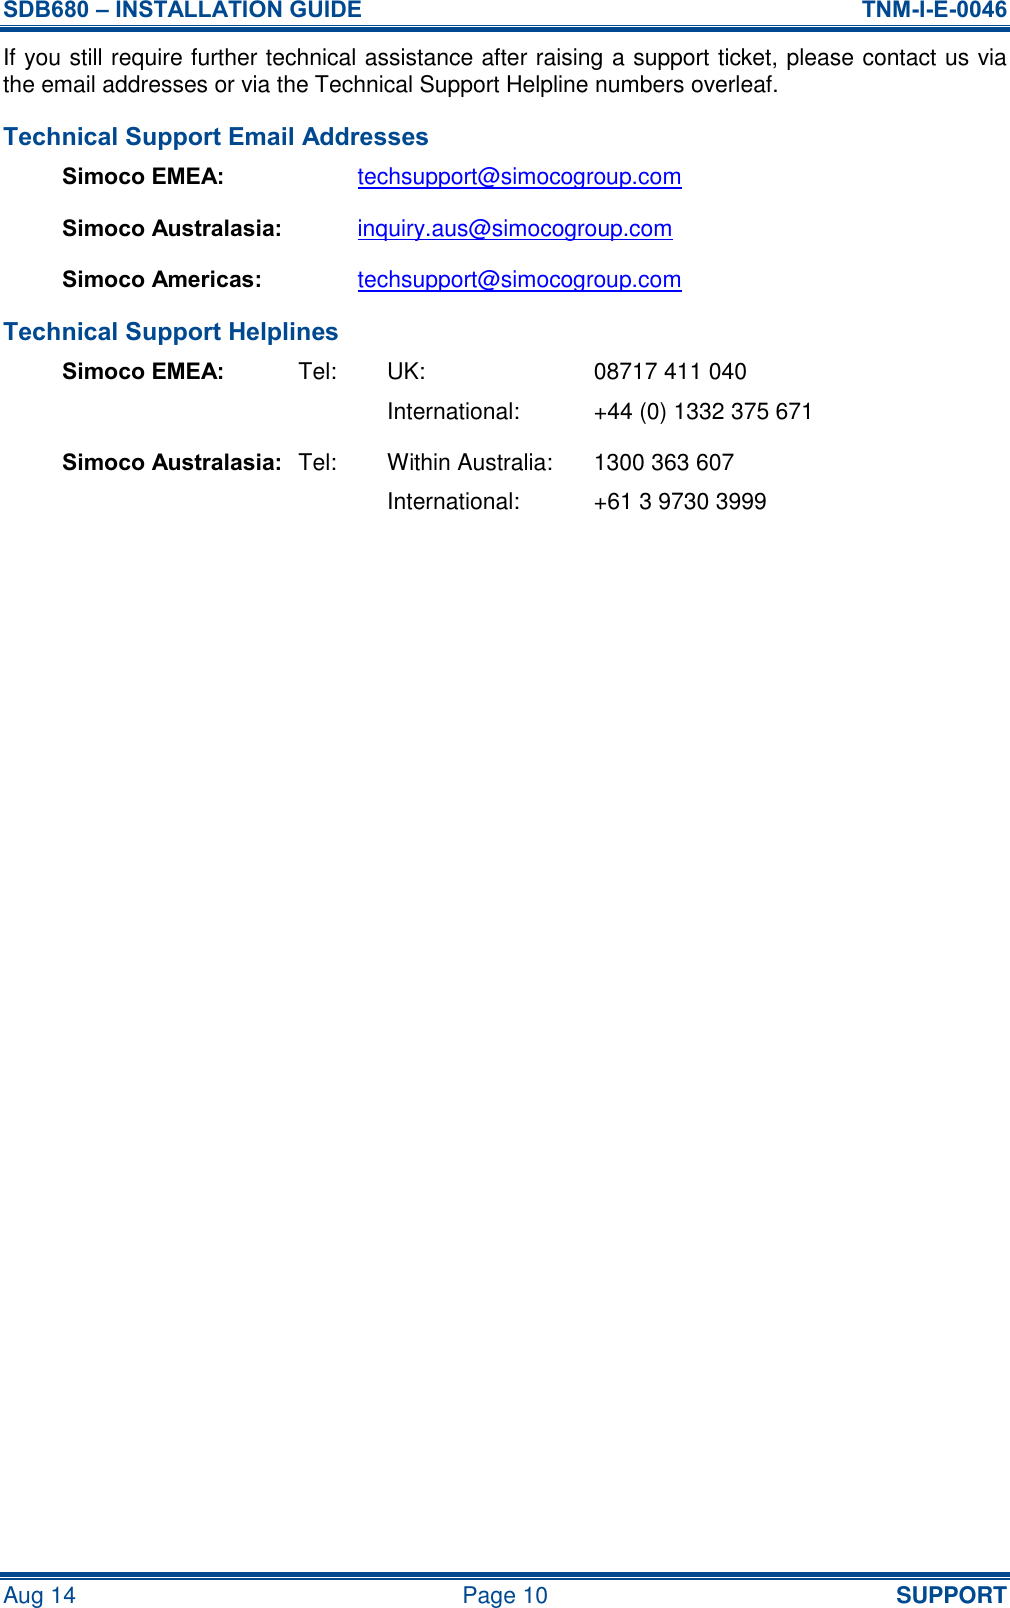 SDB680 – INSTALLATION GUIDE  TNM-I-E-0046 Aug 14  Page 10 SUPPORT If you still require further technical assistance after raising a support ticket, please contact us via the email addresses or via the Technical Support Helpline numbers overleaf. Technical Support Email Addresses Simoco EMEA: techsupport@simocogroup.com Simoco Australasia: inquiry.aus@simocogroup.com Simoco Americas: techsupport@simocogroup.com Technical Support Helplines Simoco EMEA:  Tel:  UK: 08717 411 040     International:  +44 (0) 1332 375 671 Simoco Australasia: Tel:  Within Australia:  1300 363 607     International:  +61 3 9730 3999   